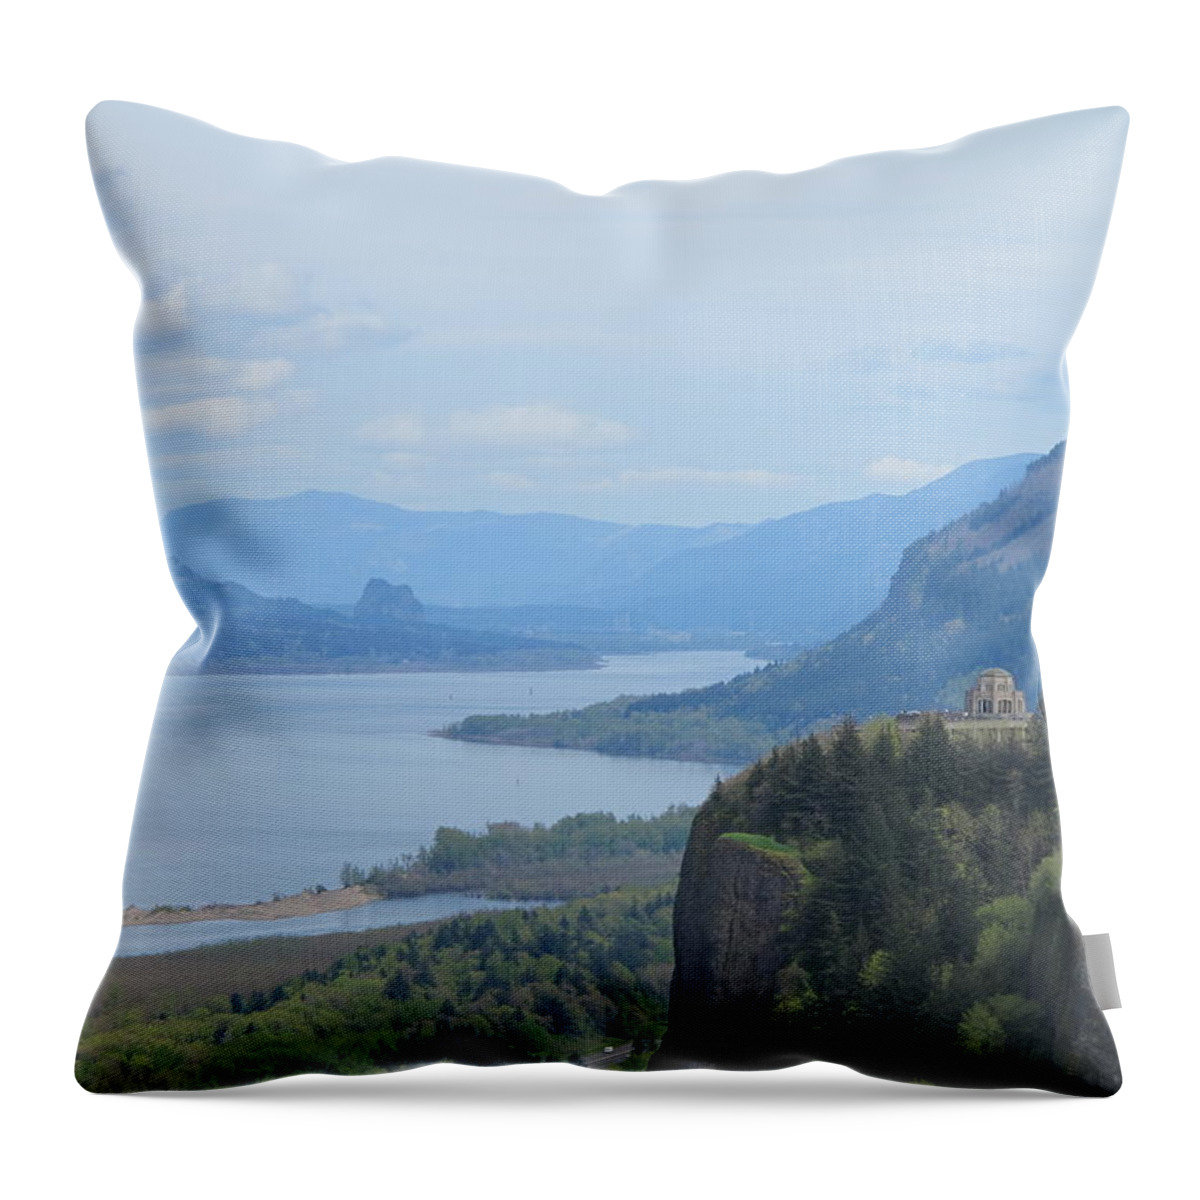 Landscape Throw Pillow featuring the photograph Photo by Teng Wang